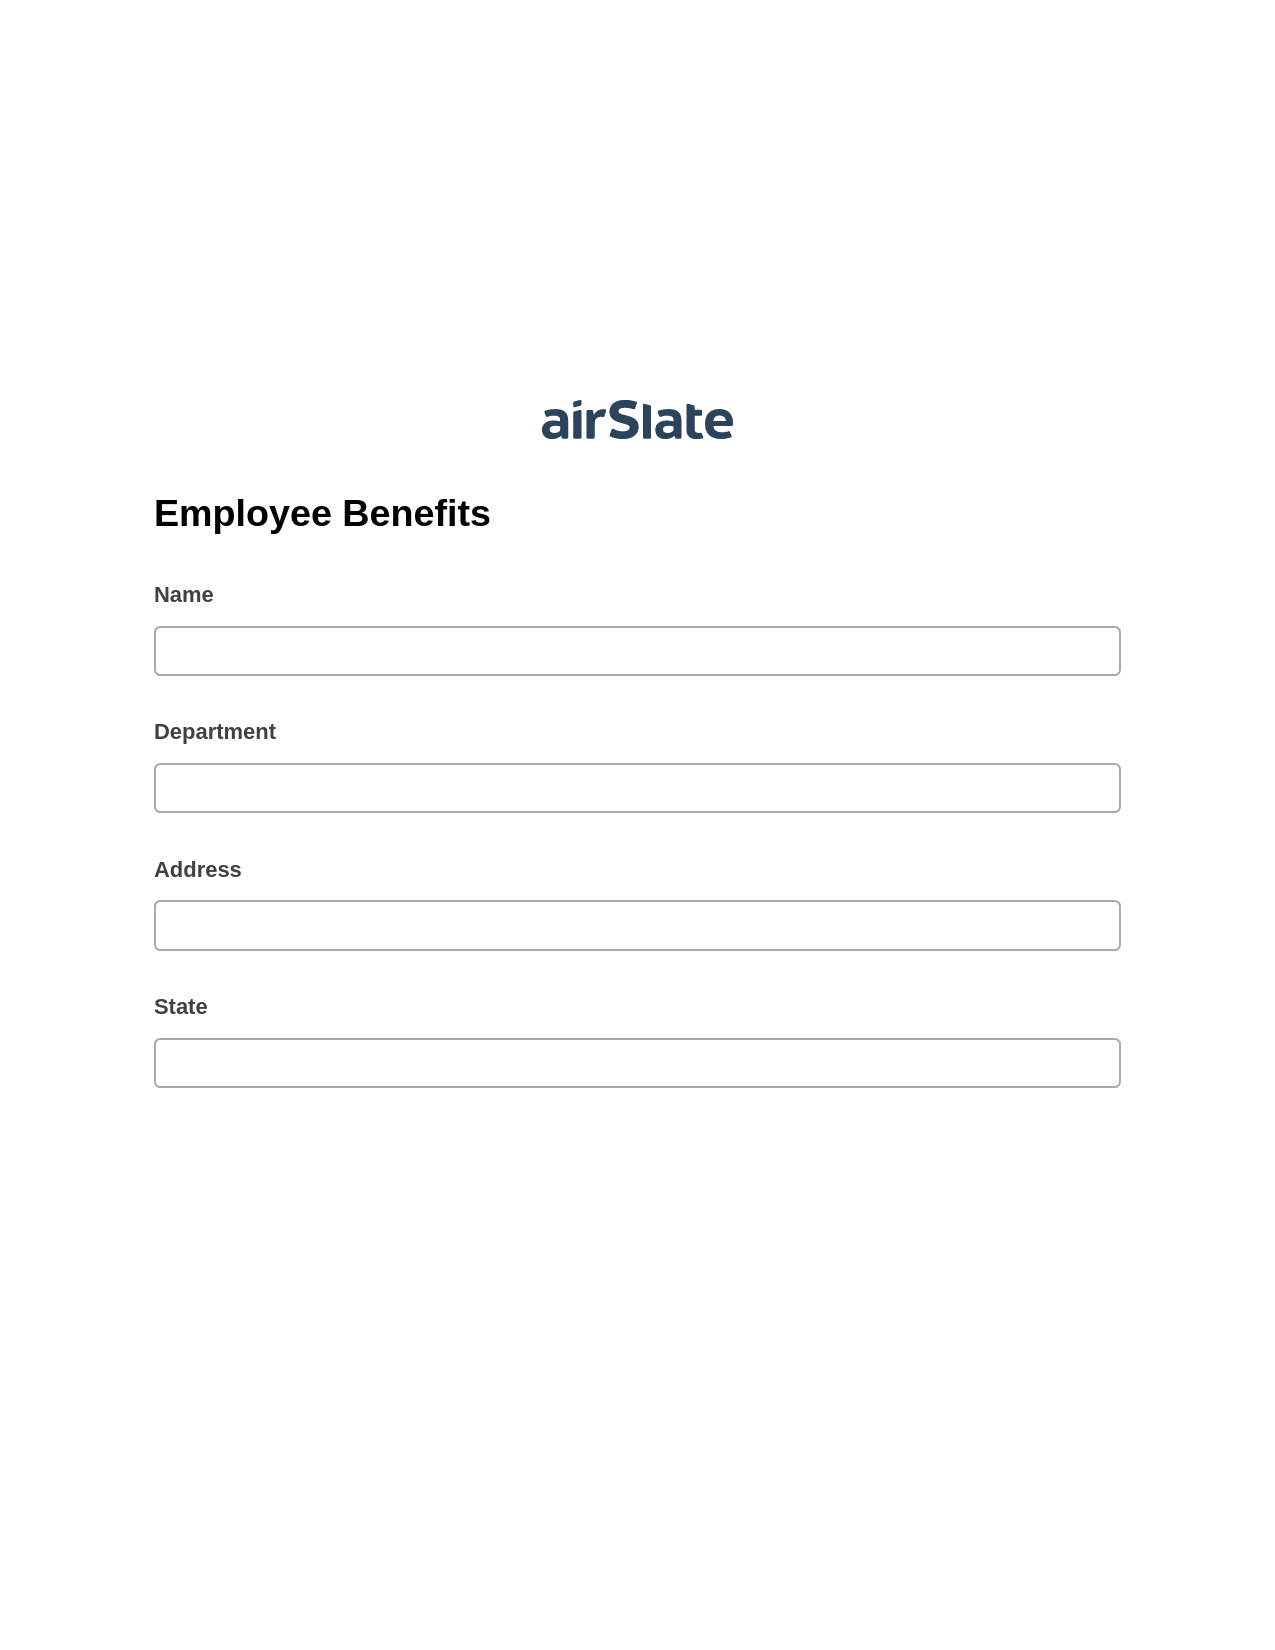 Employee Benefits Pre-fill from another Slate Bot, Create MS Dynamics 365 Records Bot, Google Drive Bot